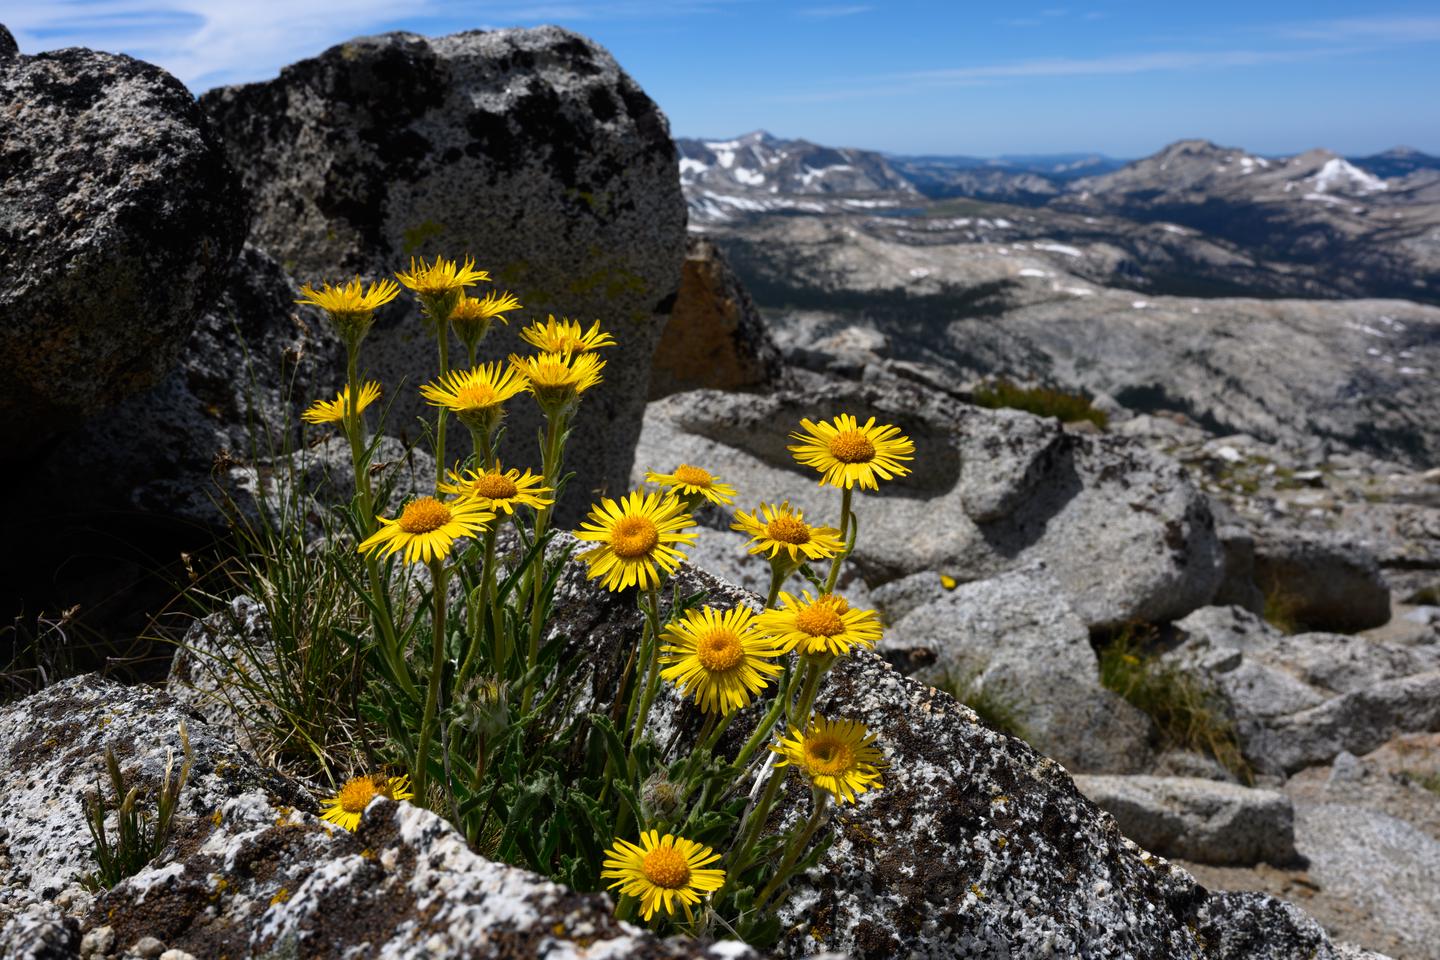 Closeup view of yellow flowers and scenic vista in background.Alpine Gold near the top of a peak in the High Country. Even at the highest elevations where vegetation becomes scarce, you can still find thriving wildflowers. 